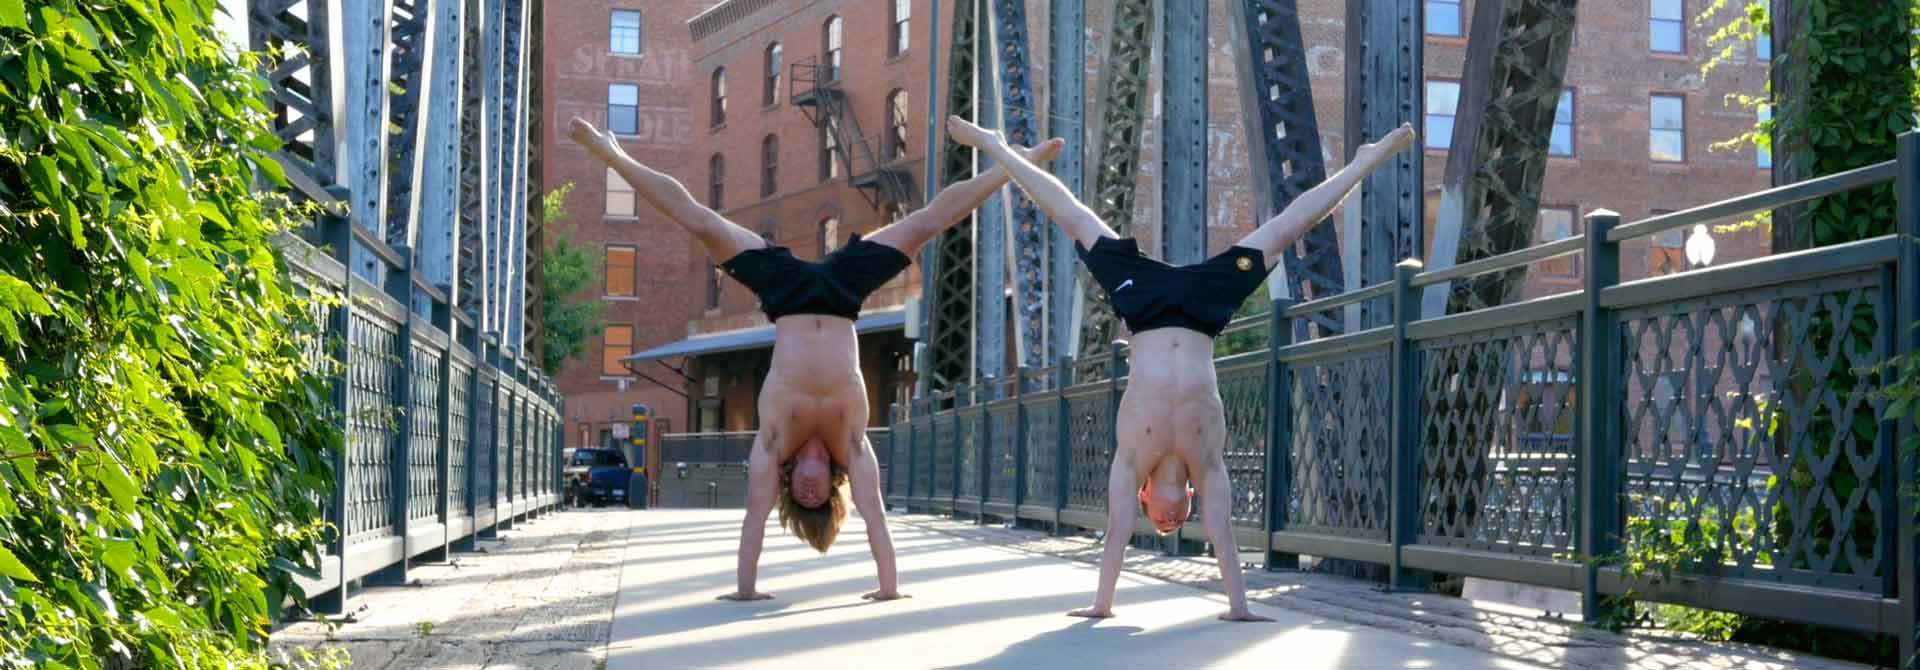 A great Handstand is by GymnasticBodies, not by accident.